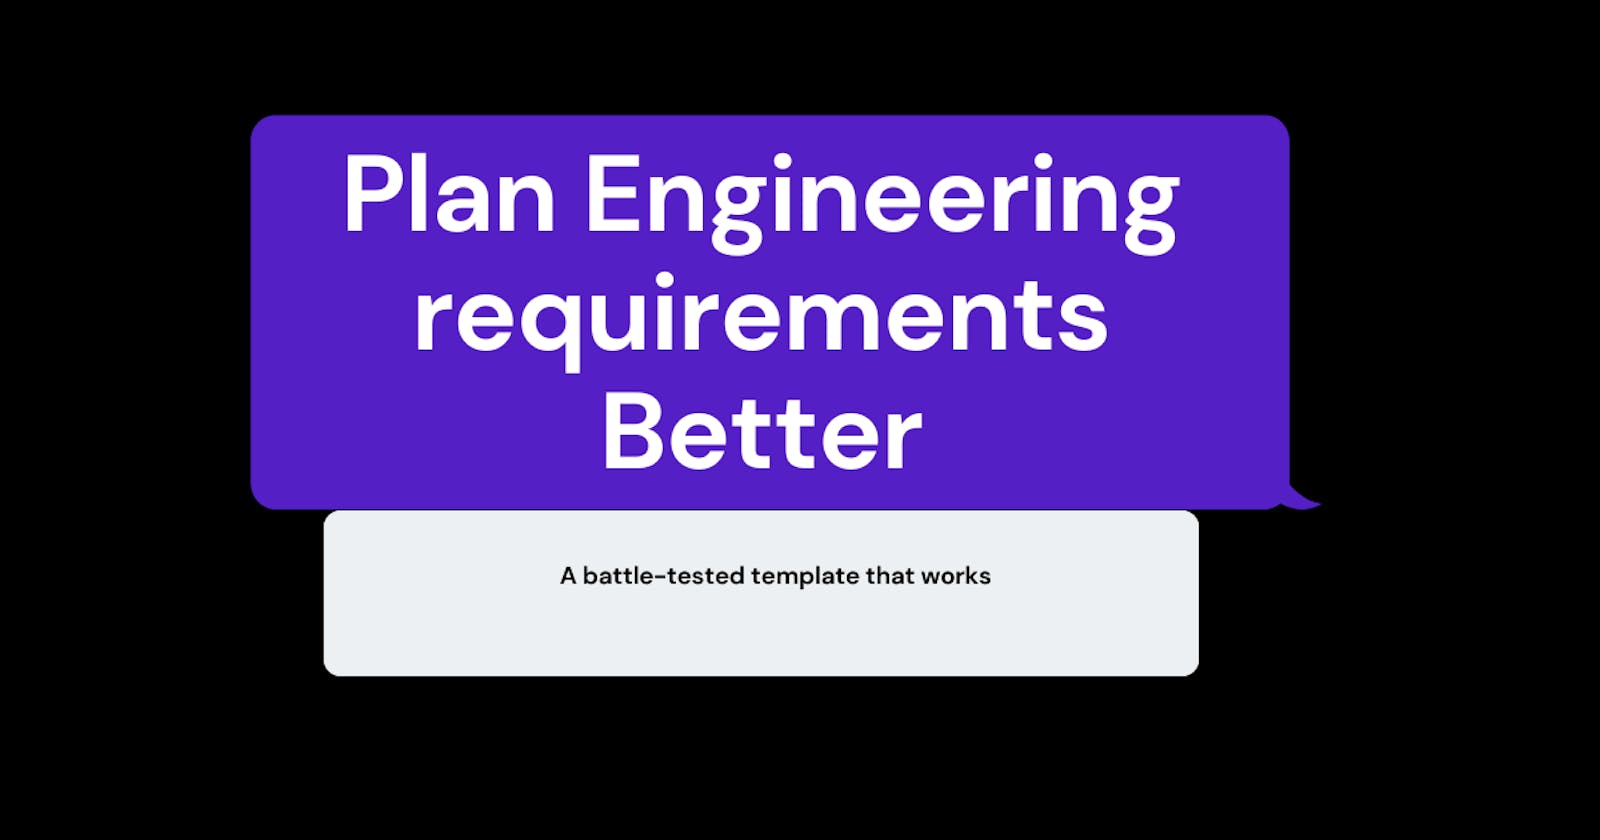 A practical approach to planning your engineering requirements better